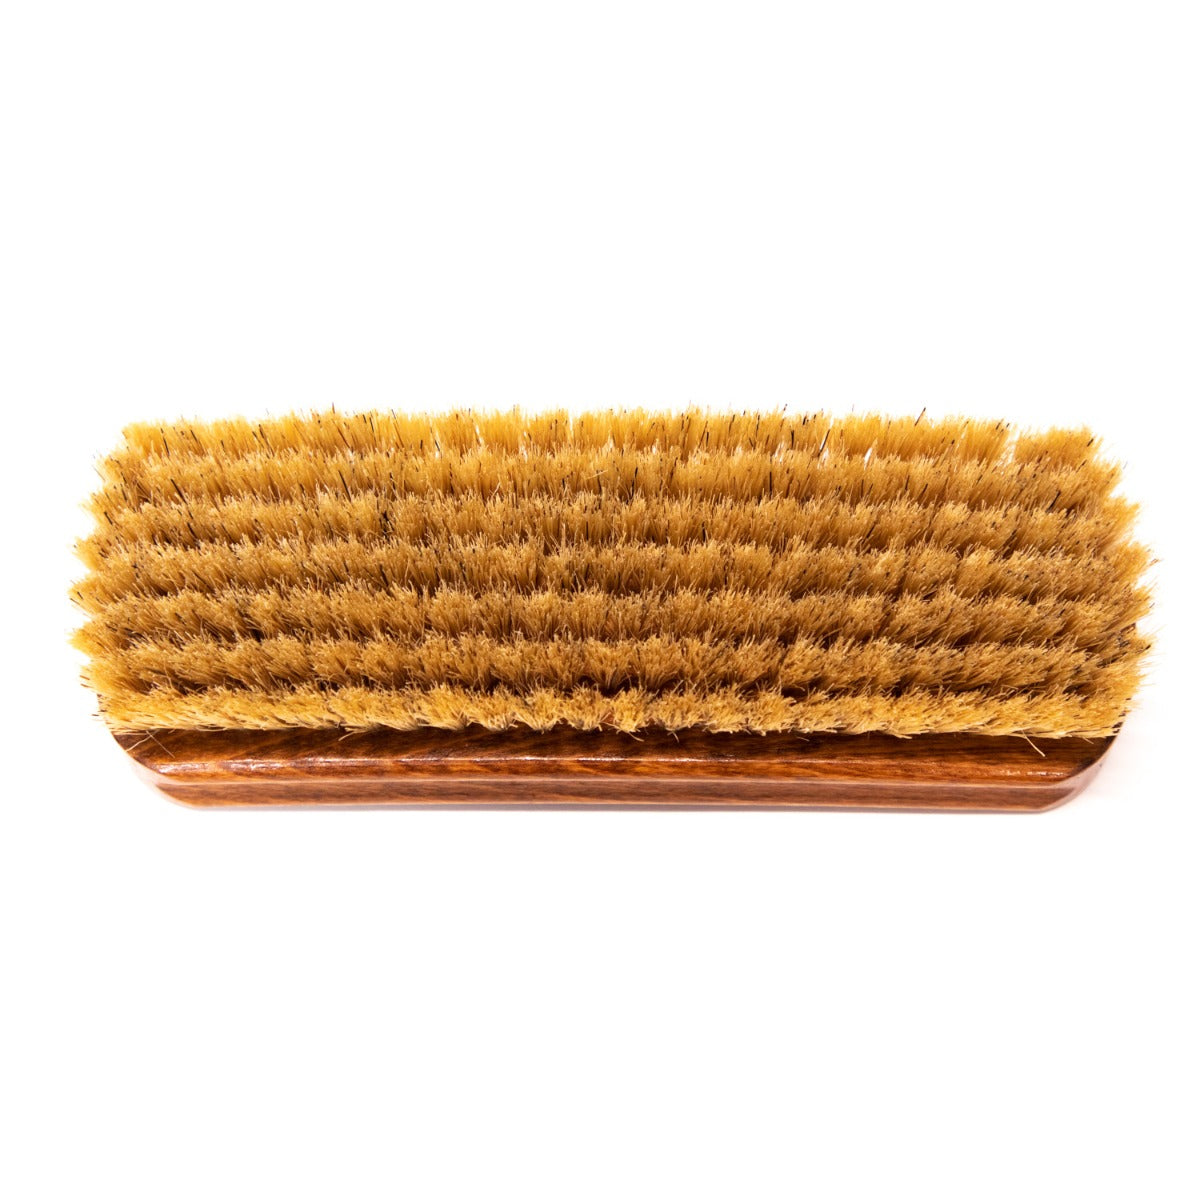 A Wellington Deluxe Pig Bristle Suede Cleaning Brush with brown bristles on a white background, available at KirbyAllison.com.